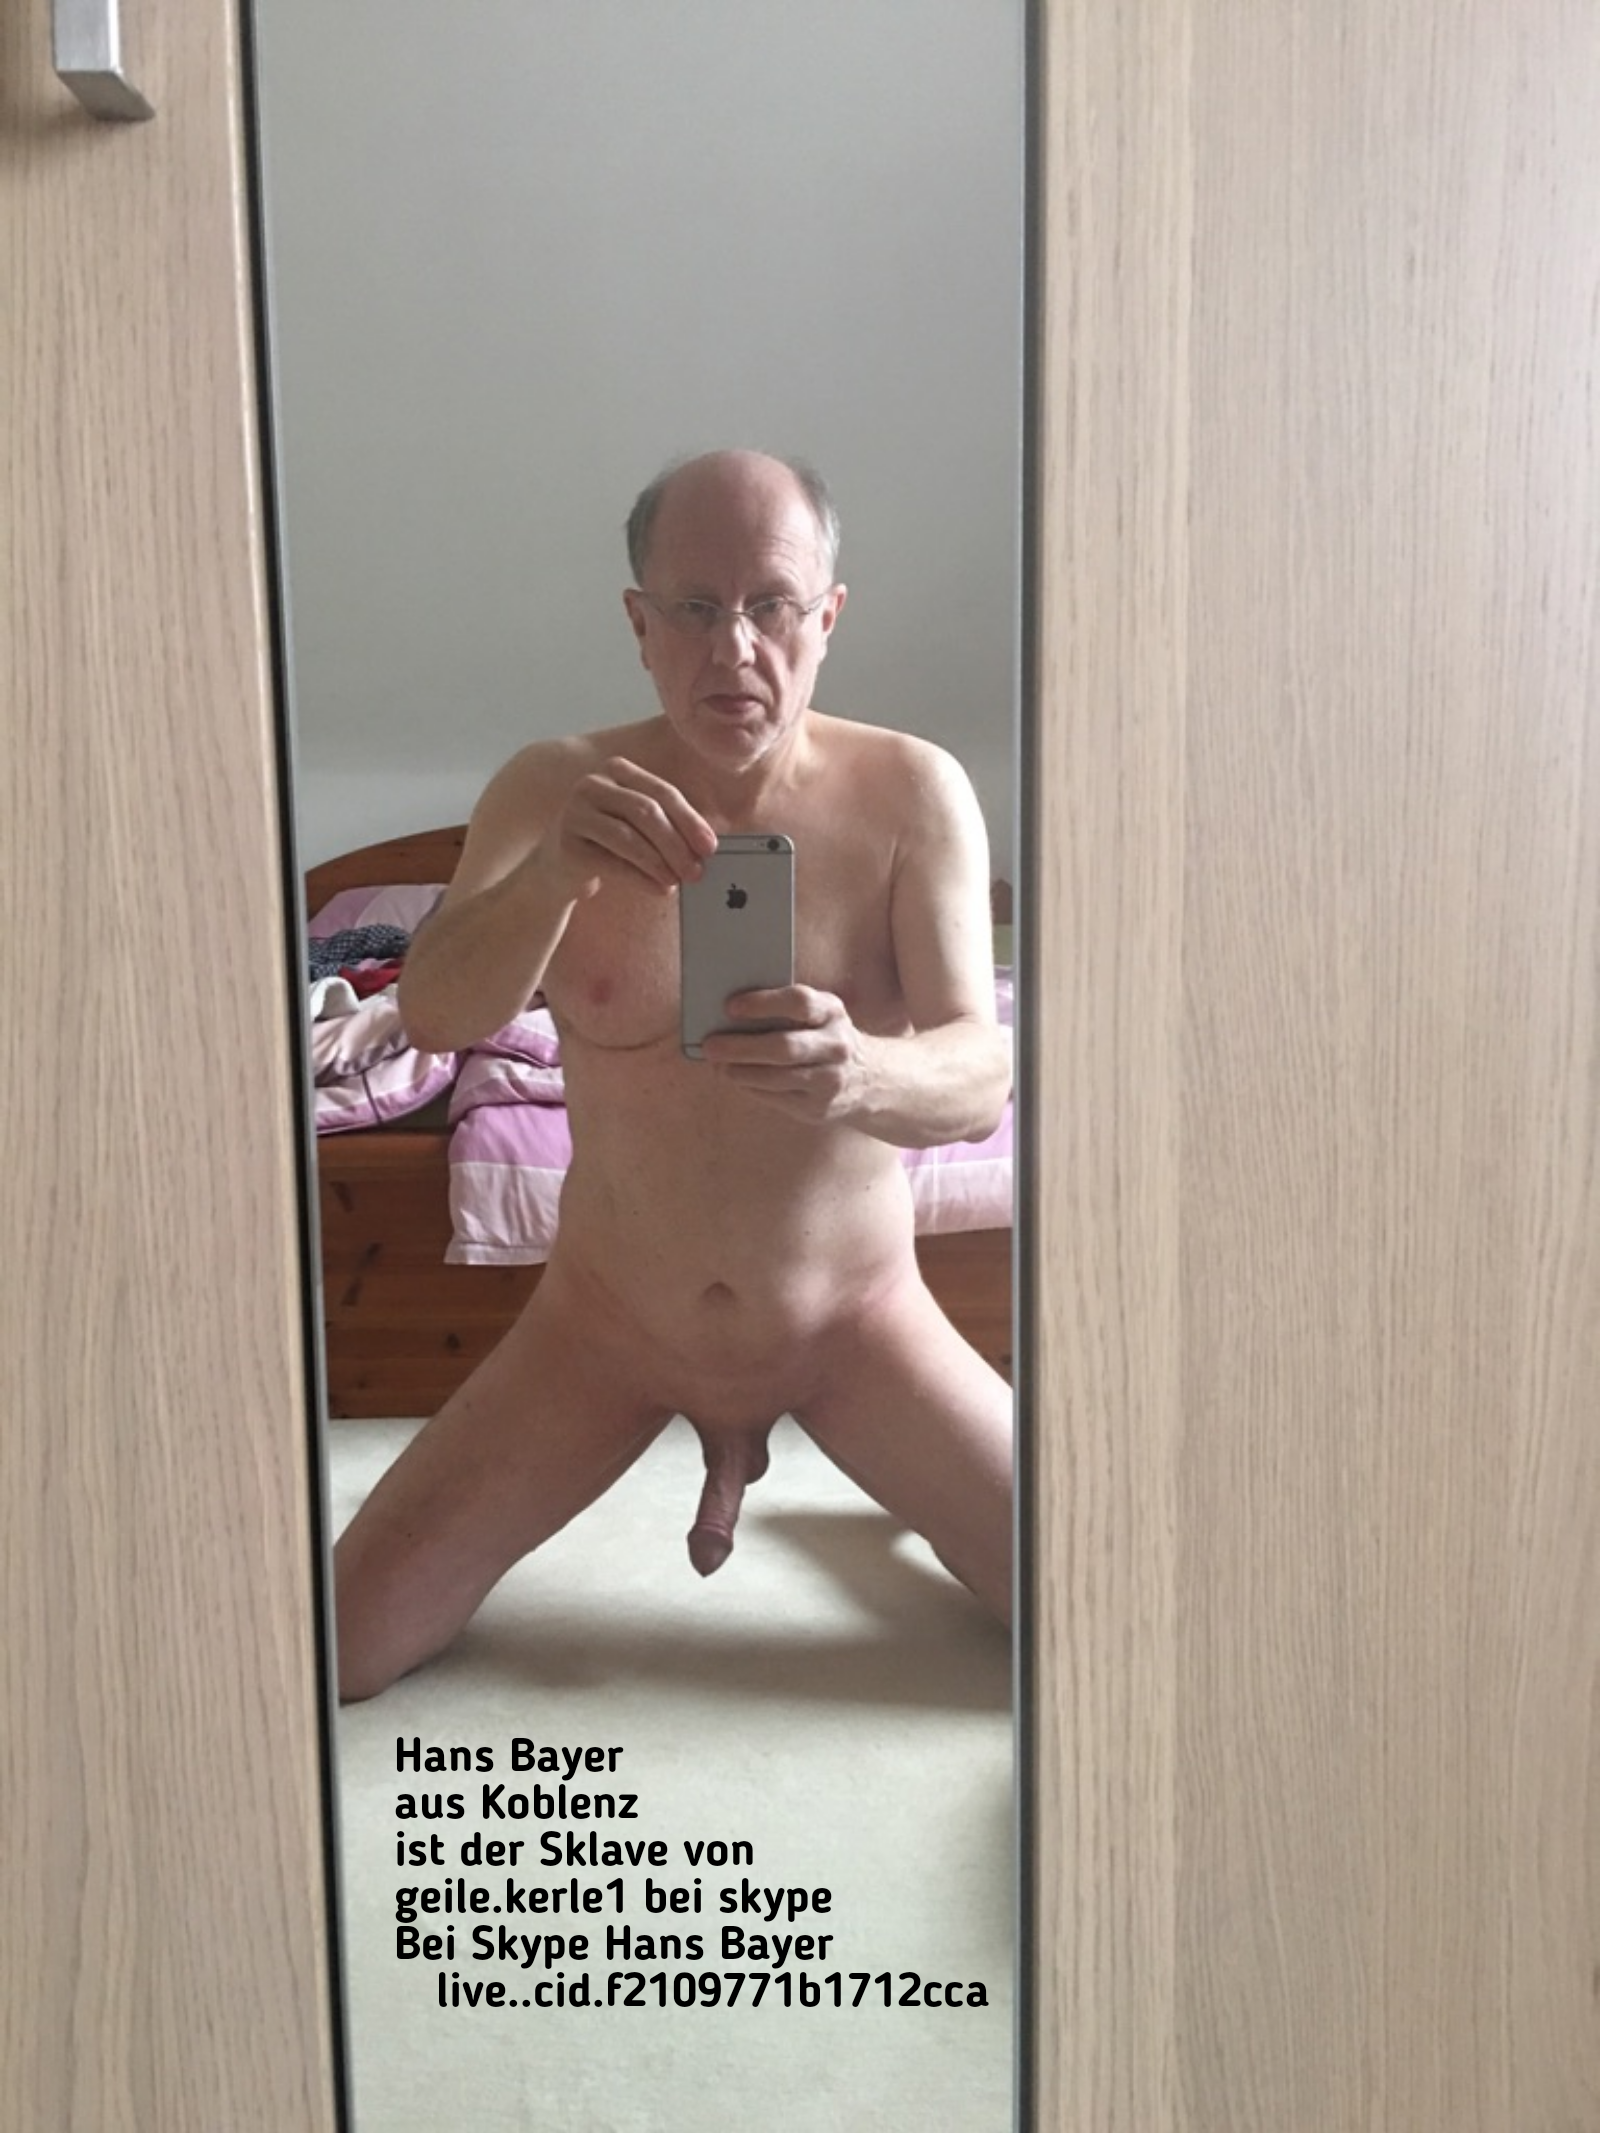 Watch the Photo by ralle1970 with the username @ralle1970, posted on November 22, 2019. The post is about the topic GayExTumblr.